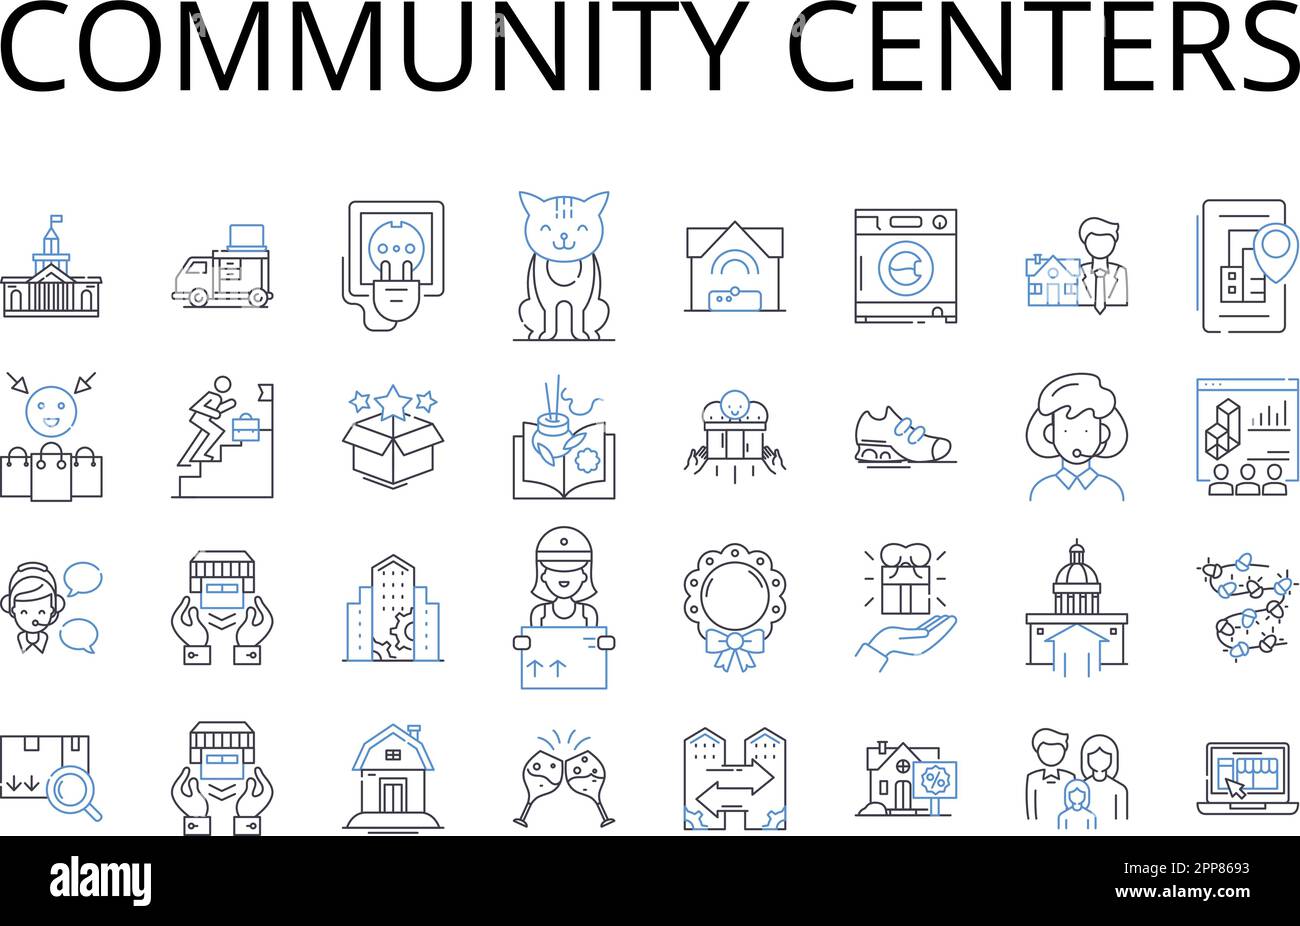 Community centers line icons collection. Learning institutions, Cultural hubs, Social spaces, Recreational centers, Civic organizations, Activity hubs Stock Vector